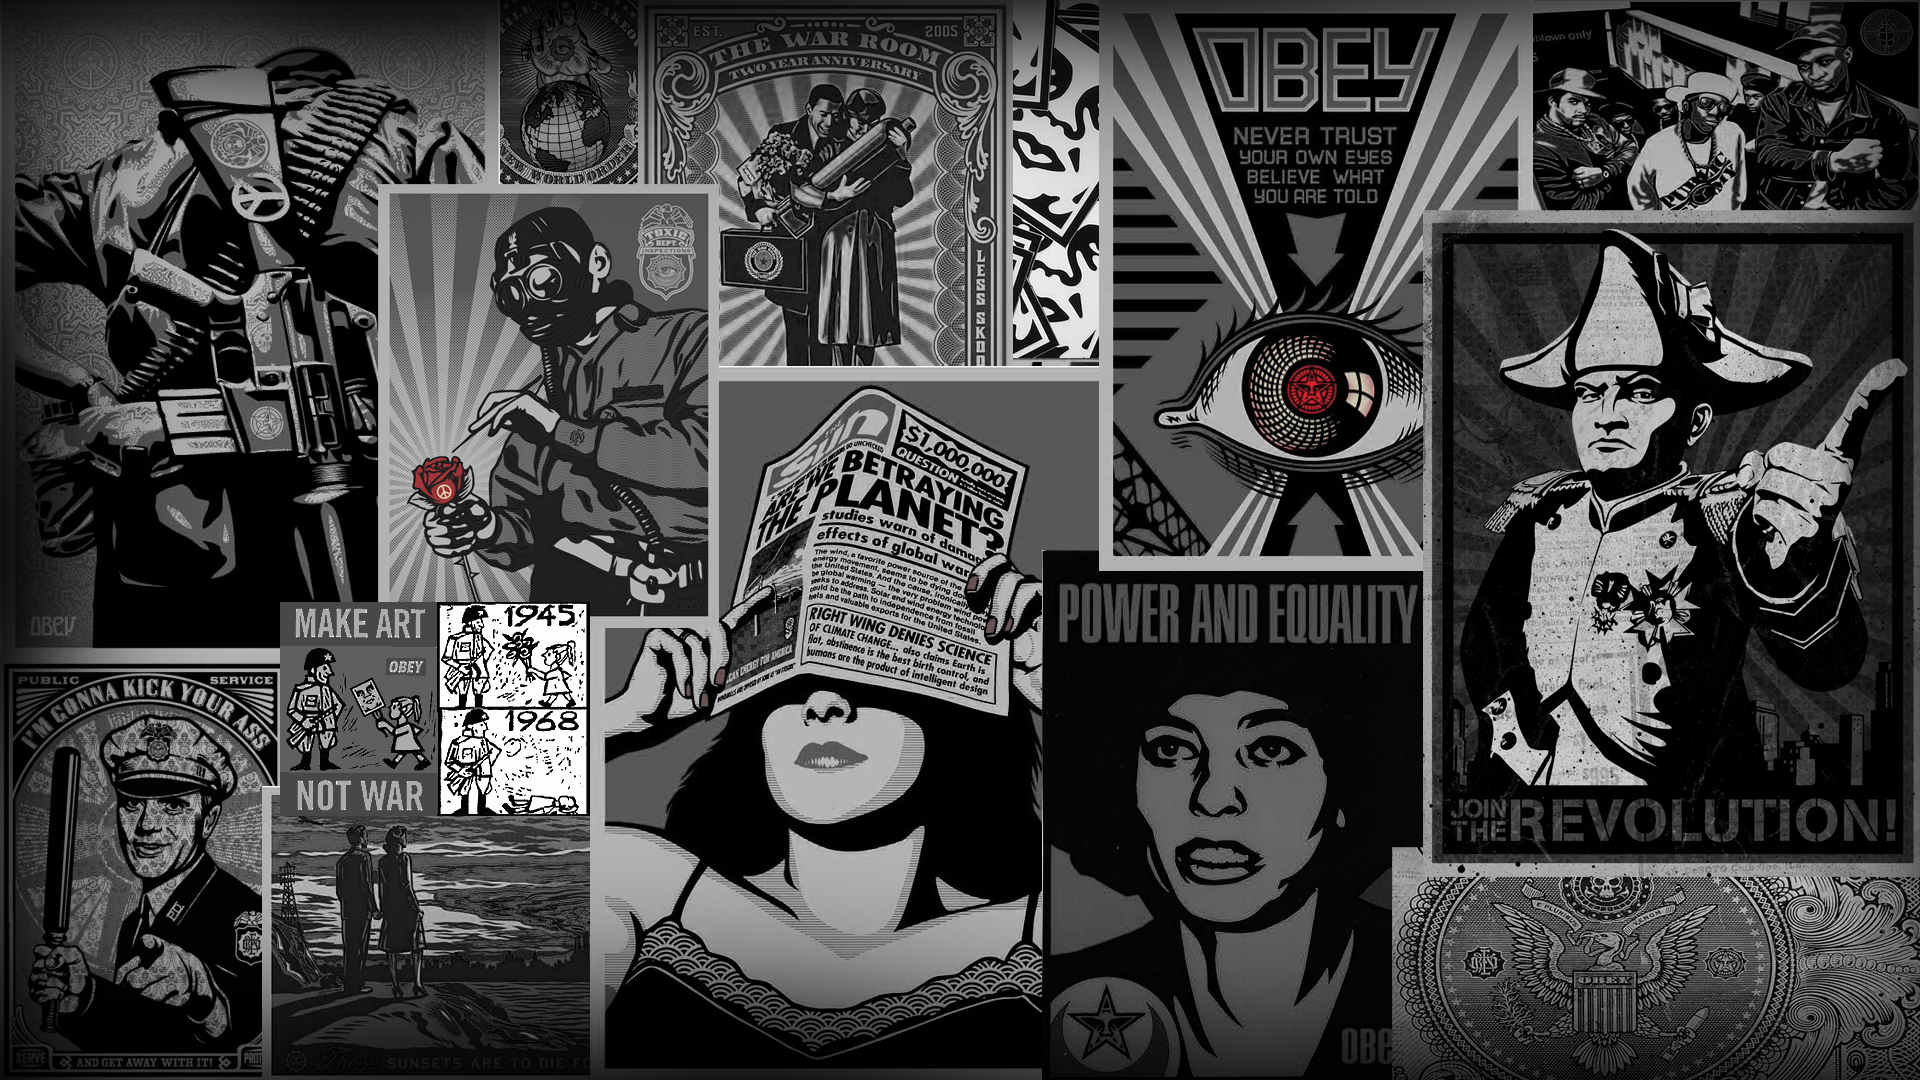 Obey Wallpaper For My Home Thejoyoung Wordpress Tag